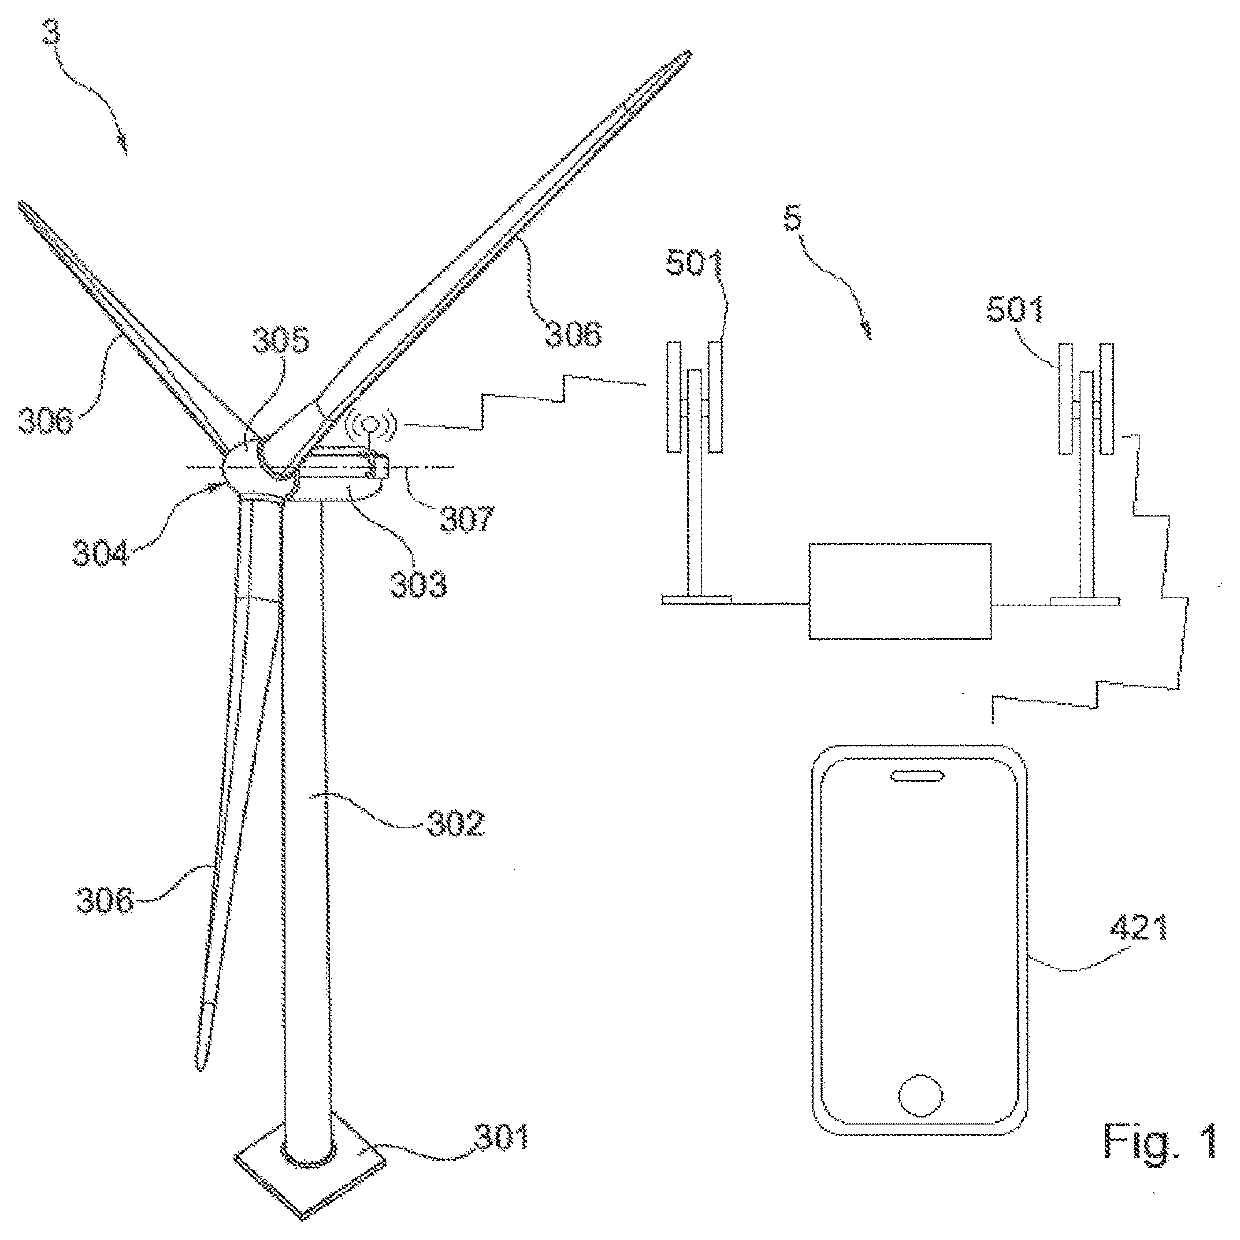 Improvements for servicing a wind turbine